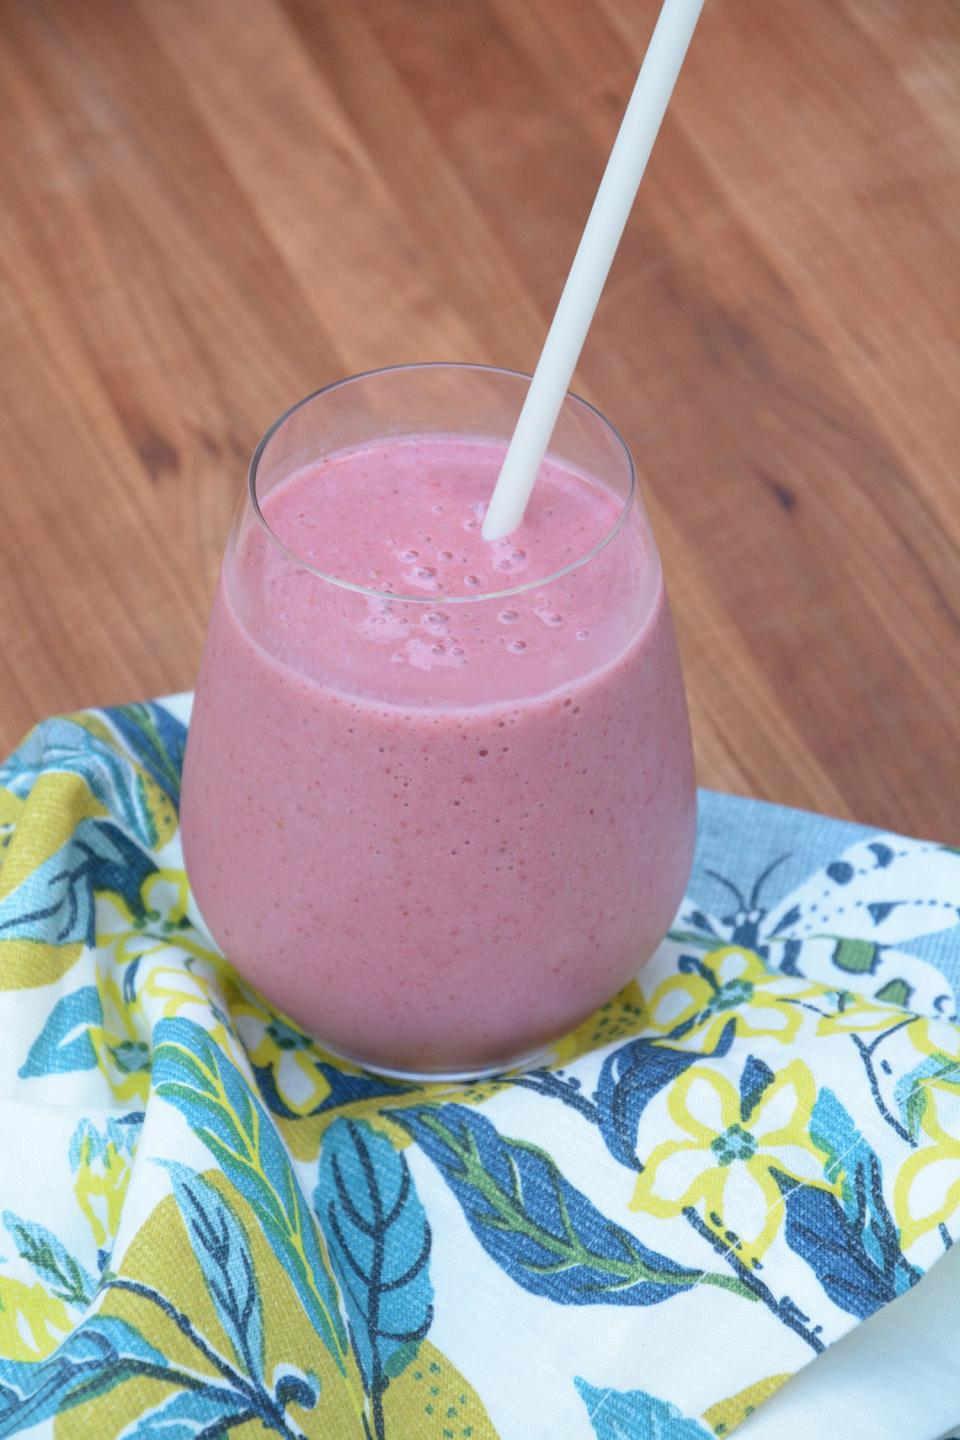 This smoothie incorporates kefir or yogurt and mixes it with other ingredients.